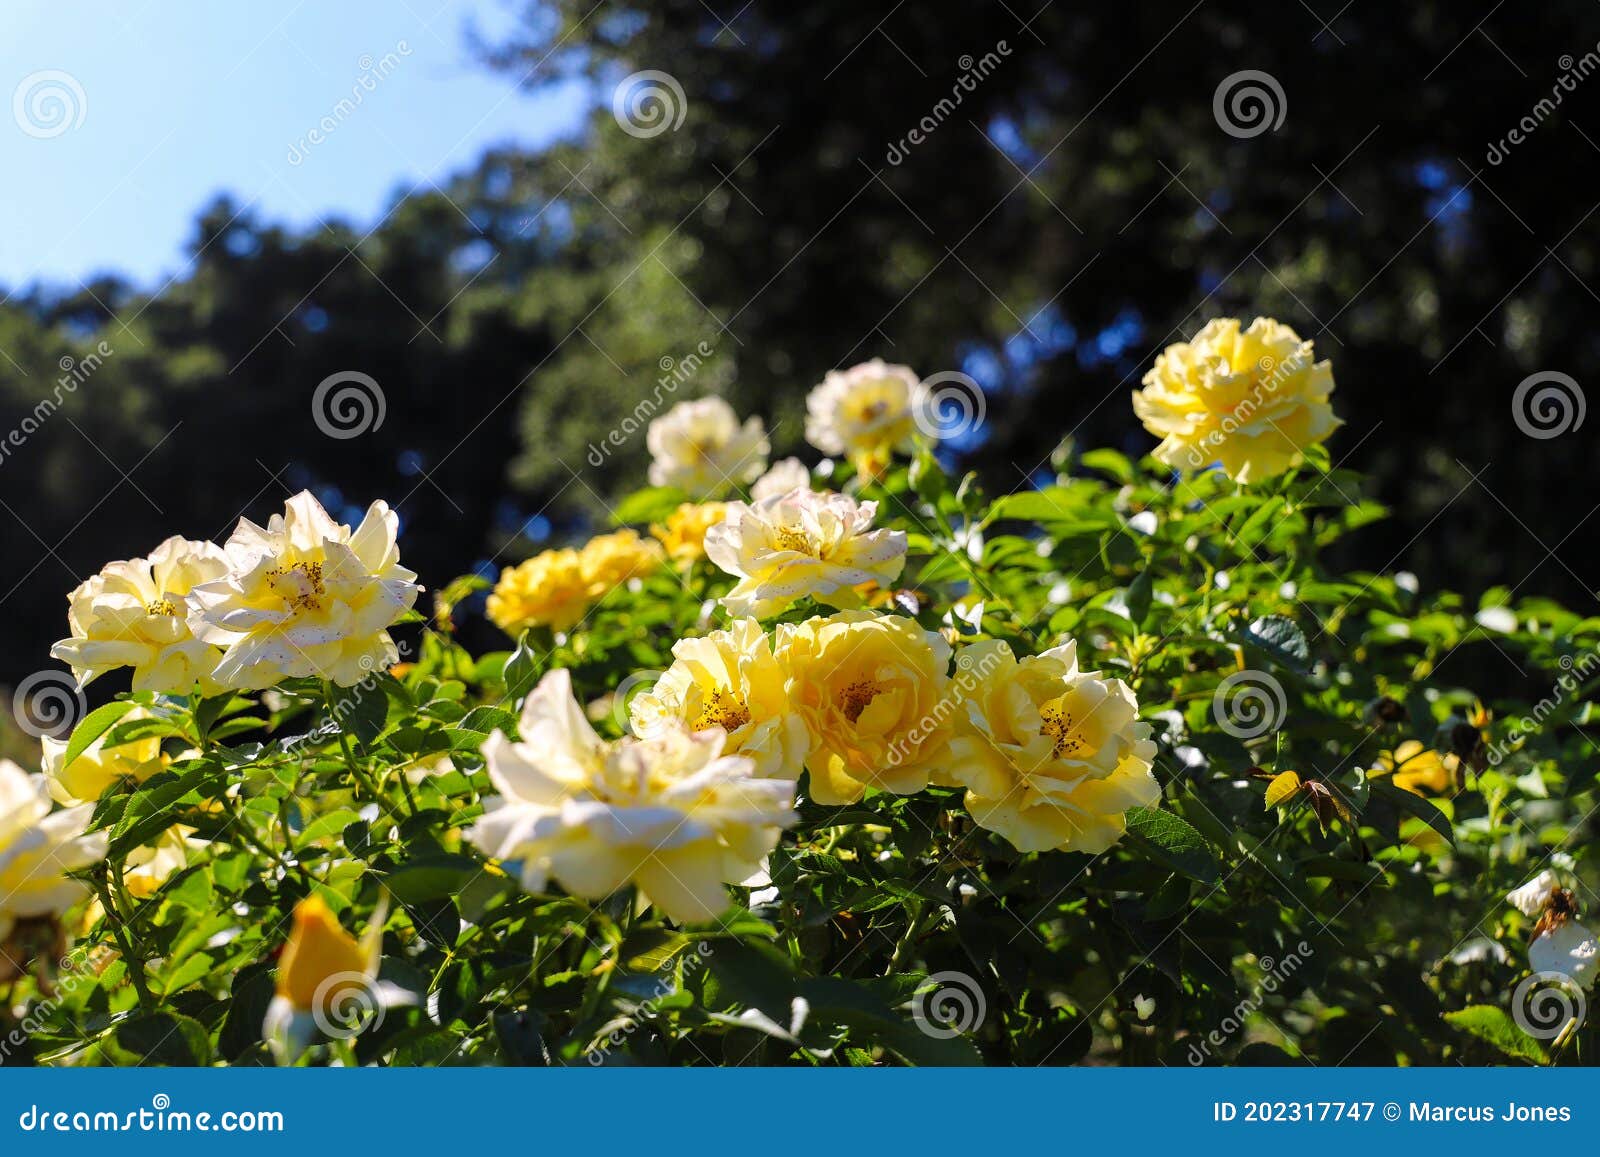 Yellow And White Flowers In The Garden At The Descanso Gardens Stock Image Image Of Yellow Gardens 202317747